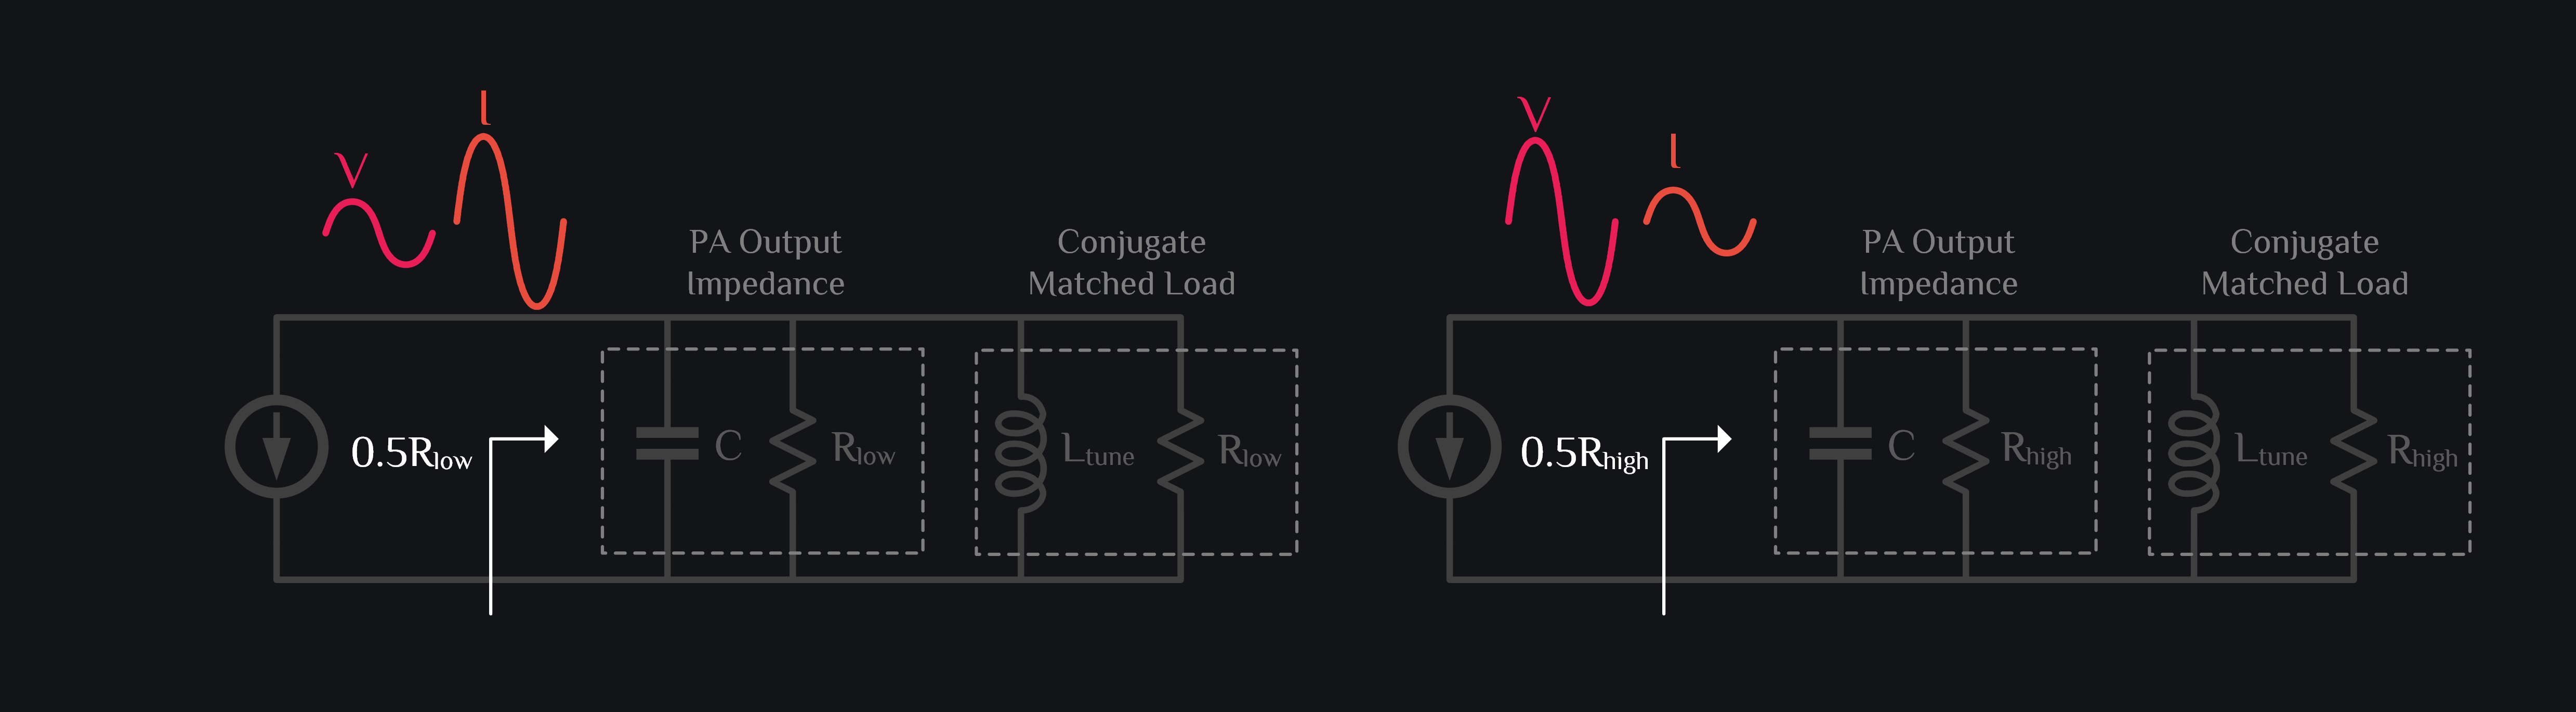 conjugate match for power amplifiers is non-optimal